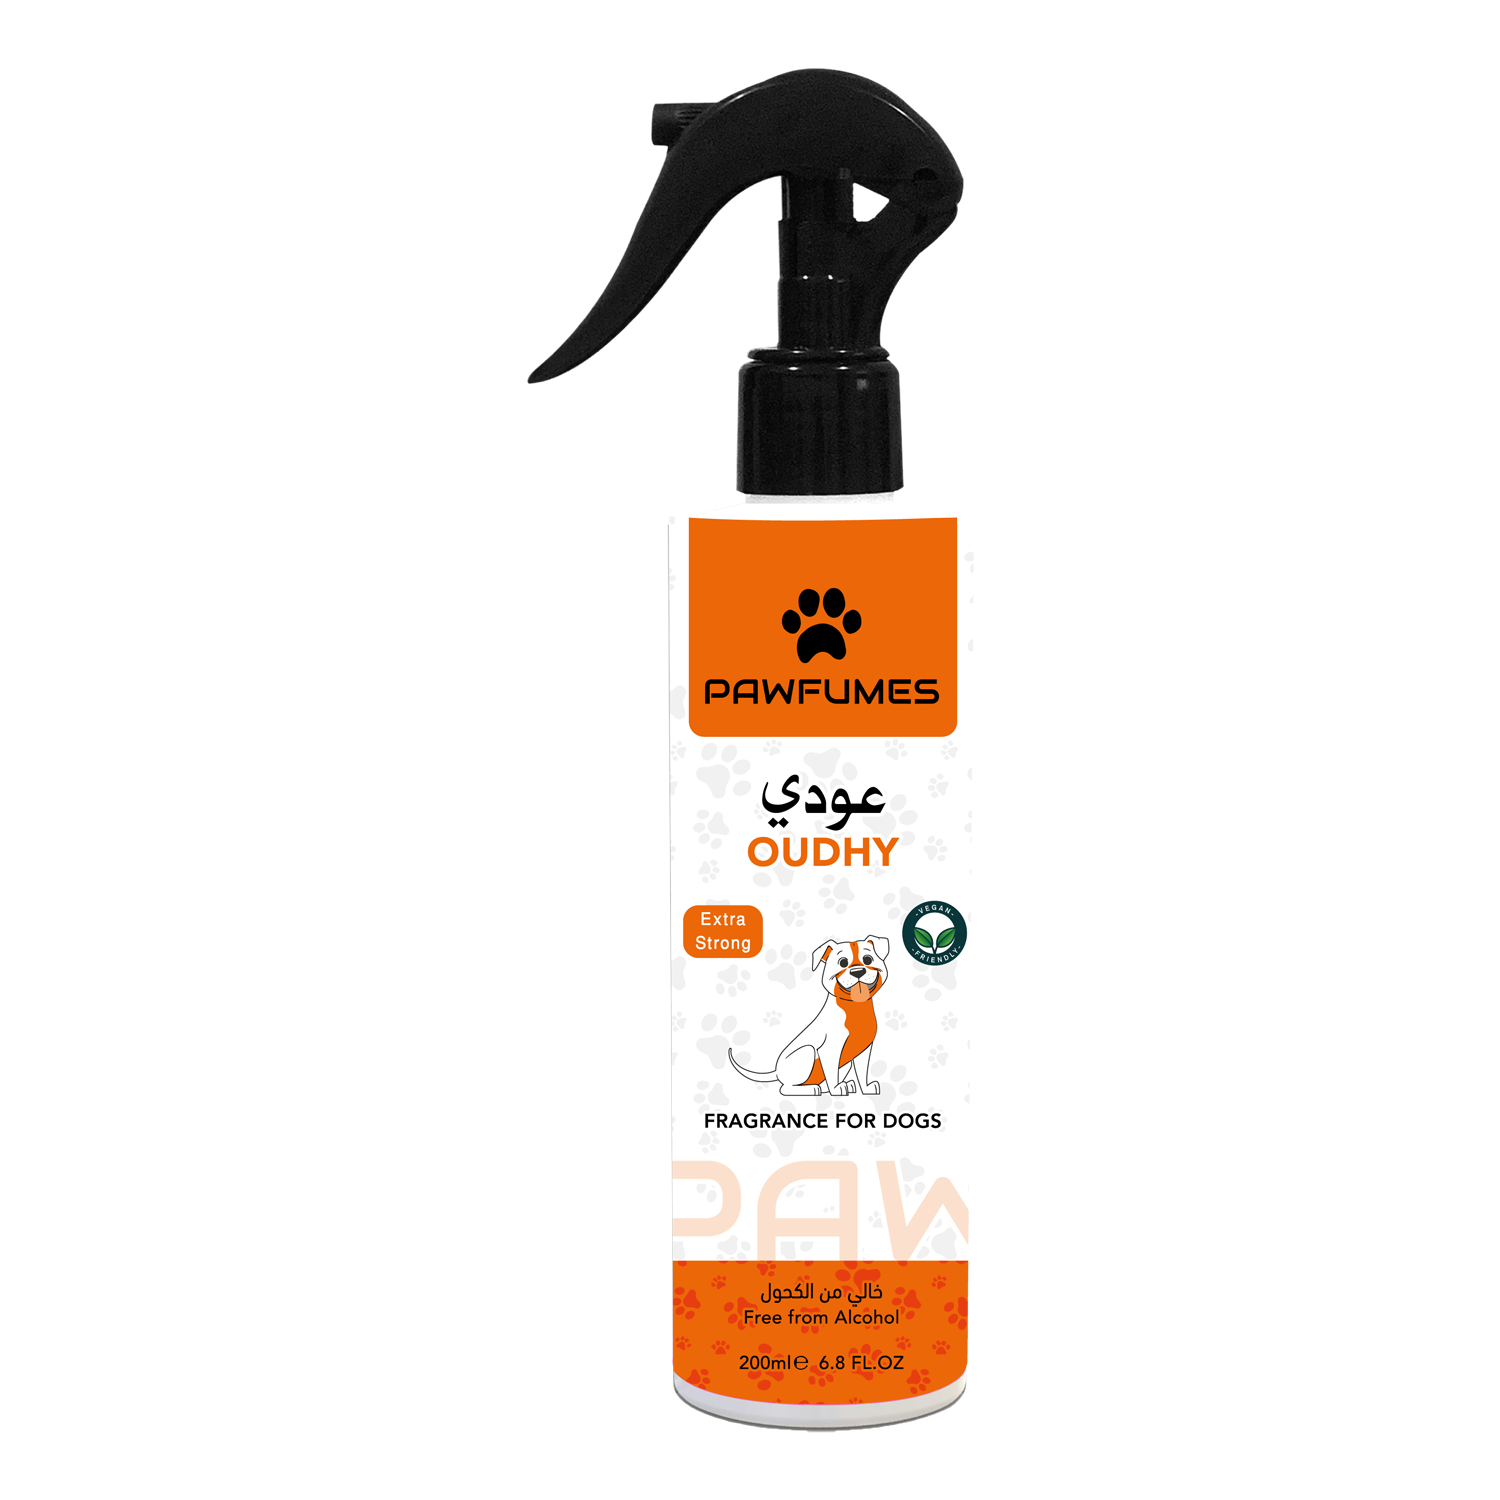 Pawfumes Fragrance Spray For Dogs - OUDHY -200 Ml - Vegan